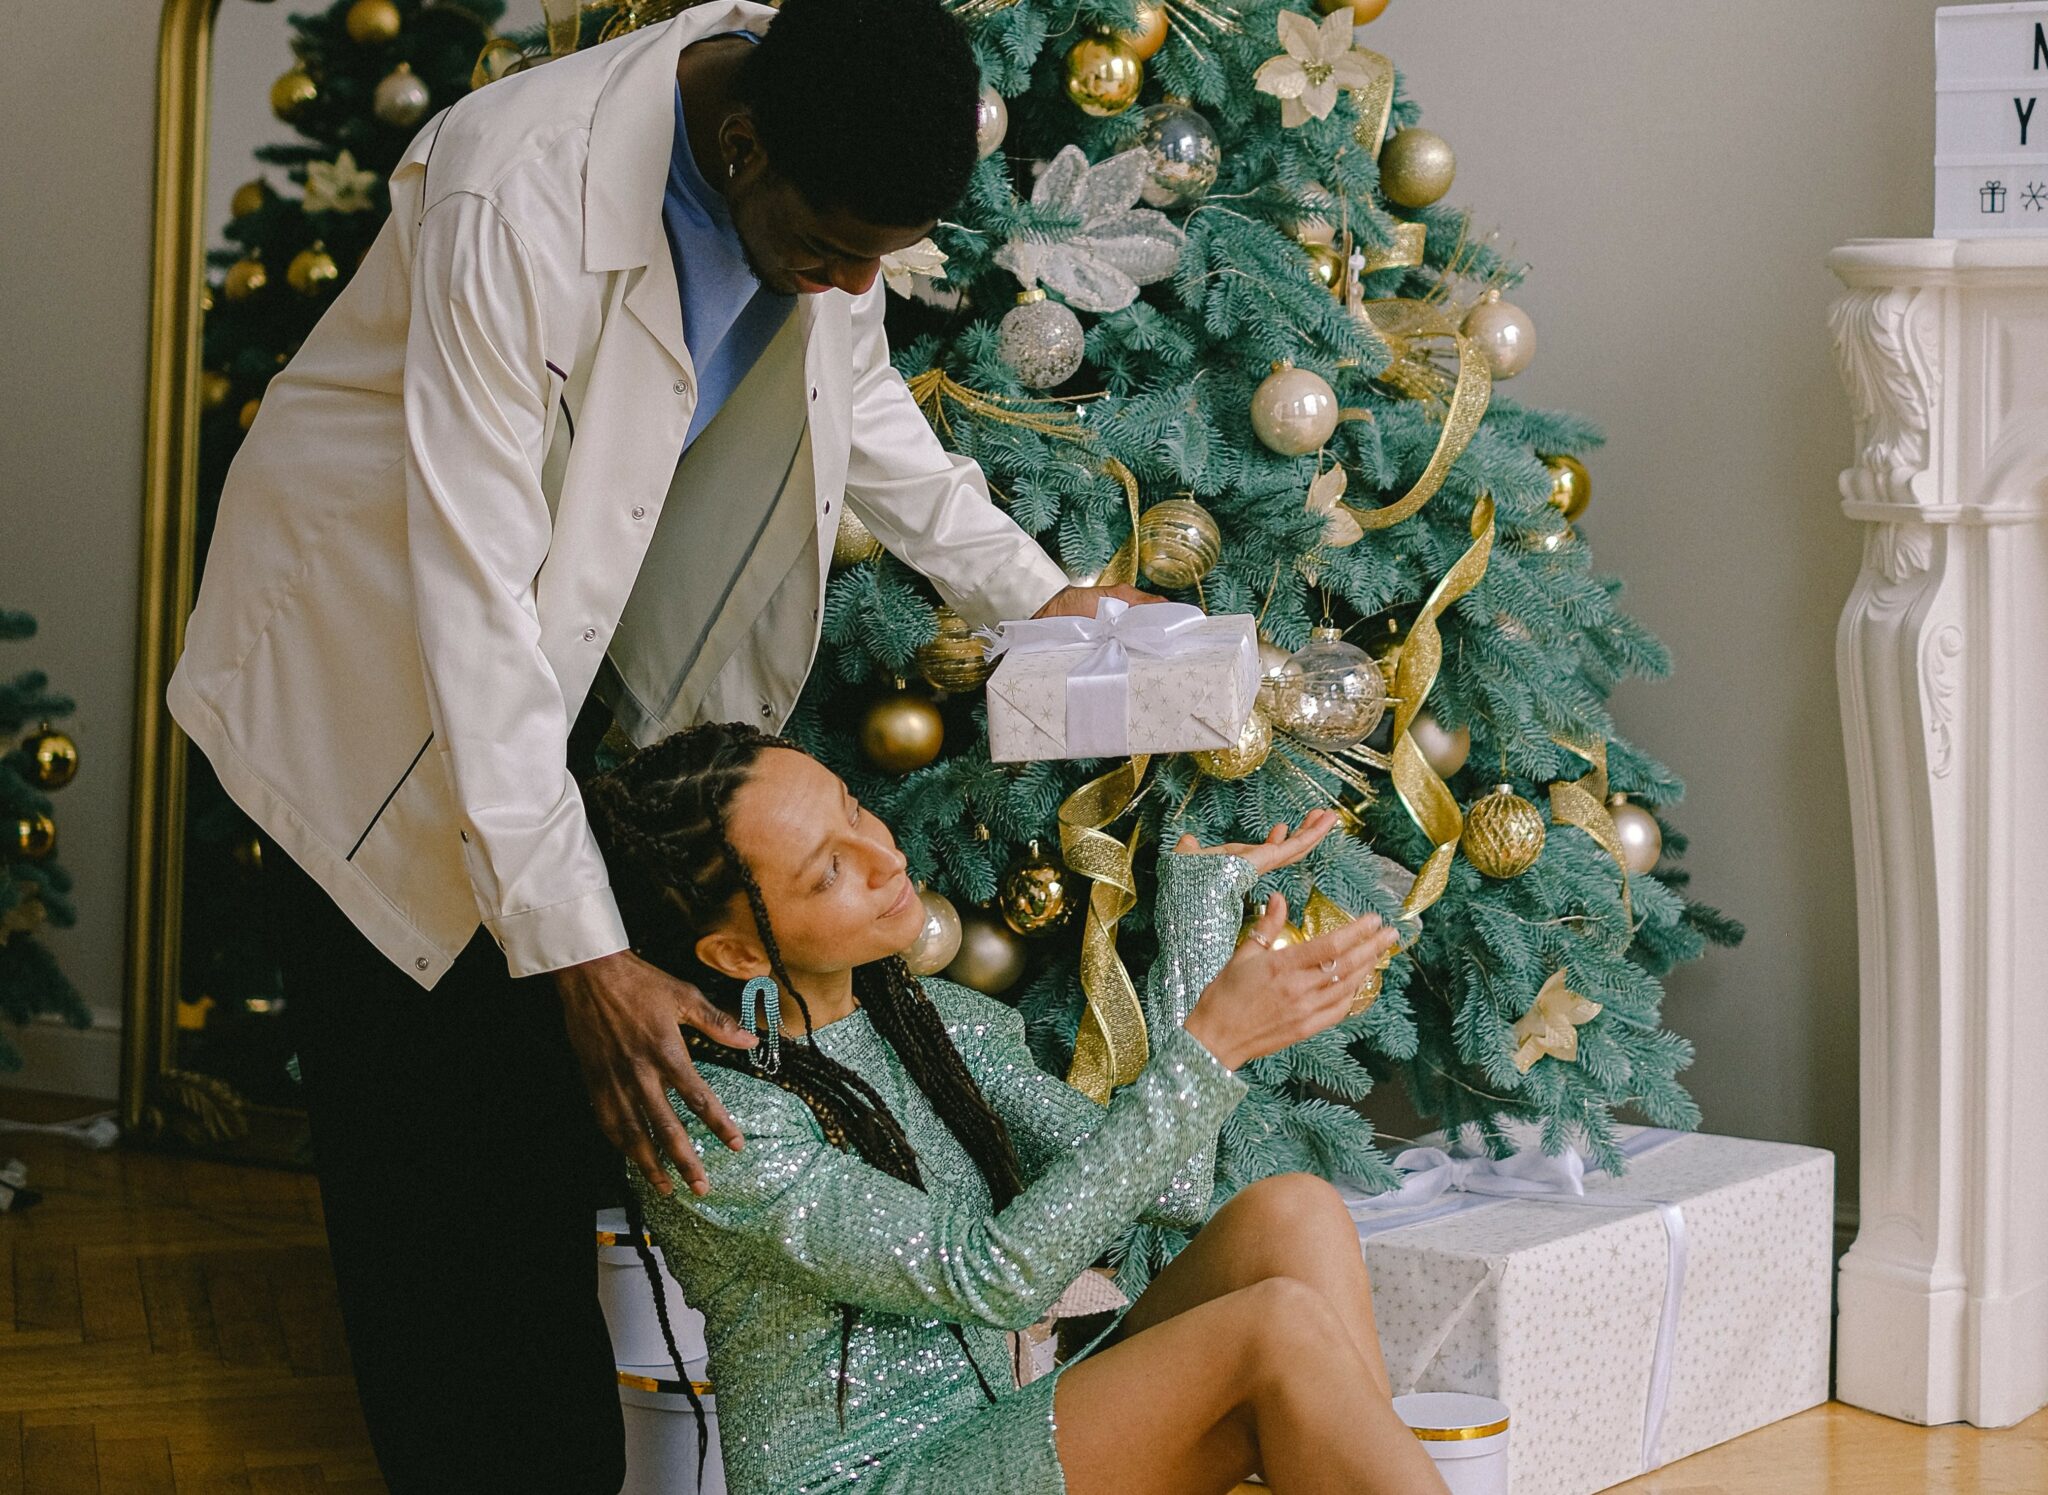 A woman sitting under a Christmas tree being handed a present by her partner.